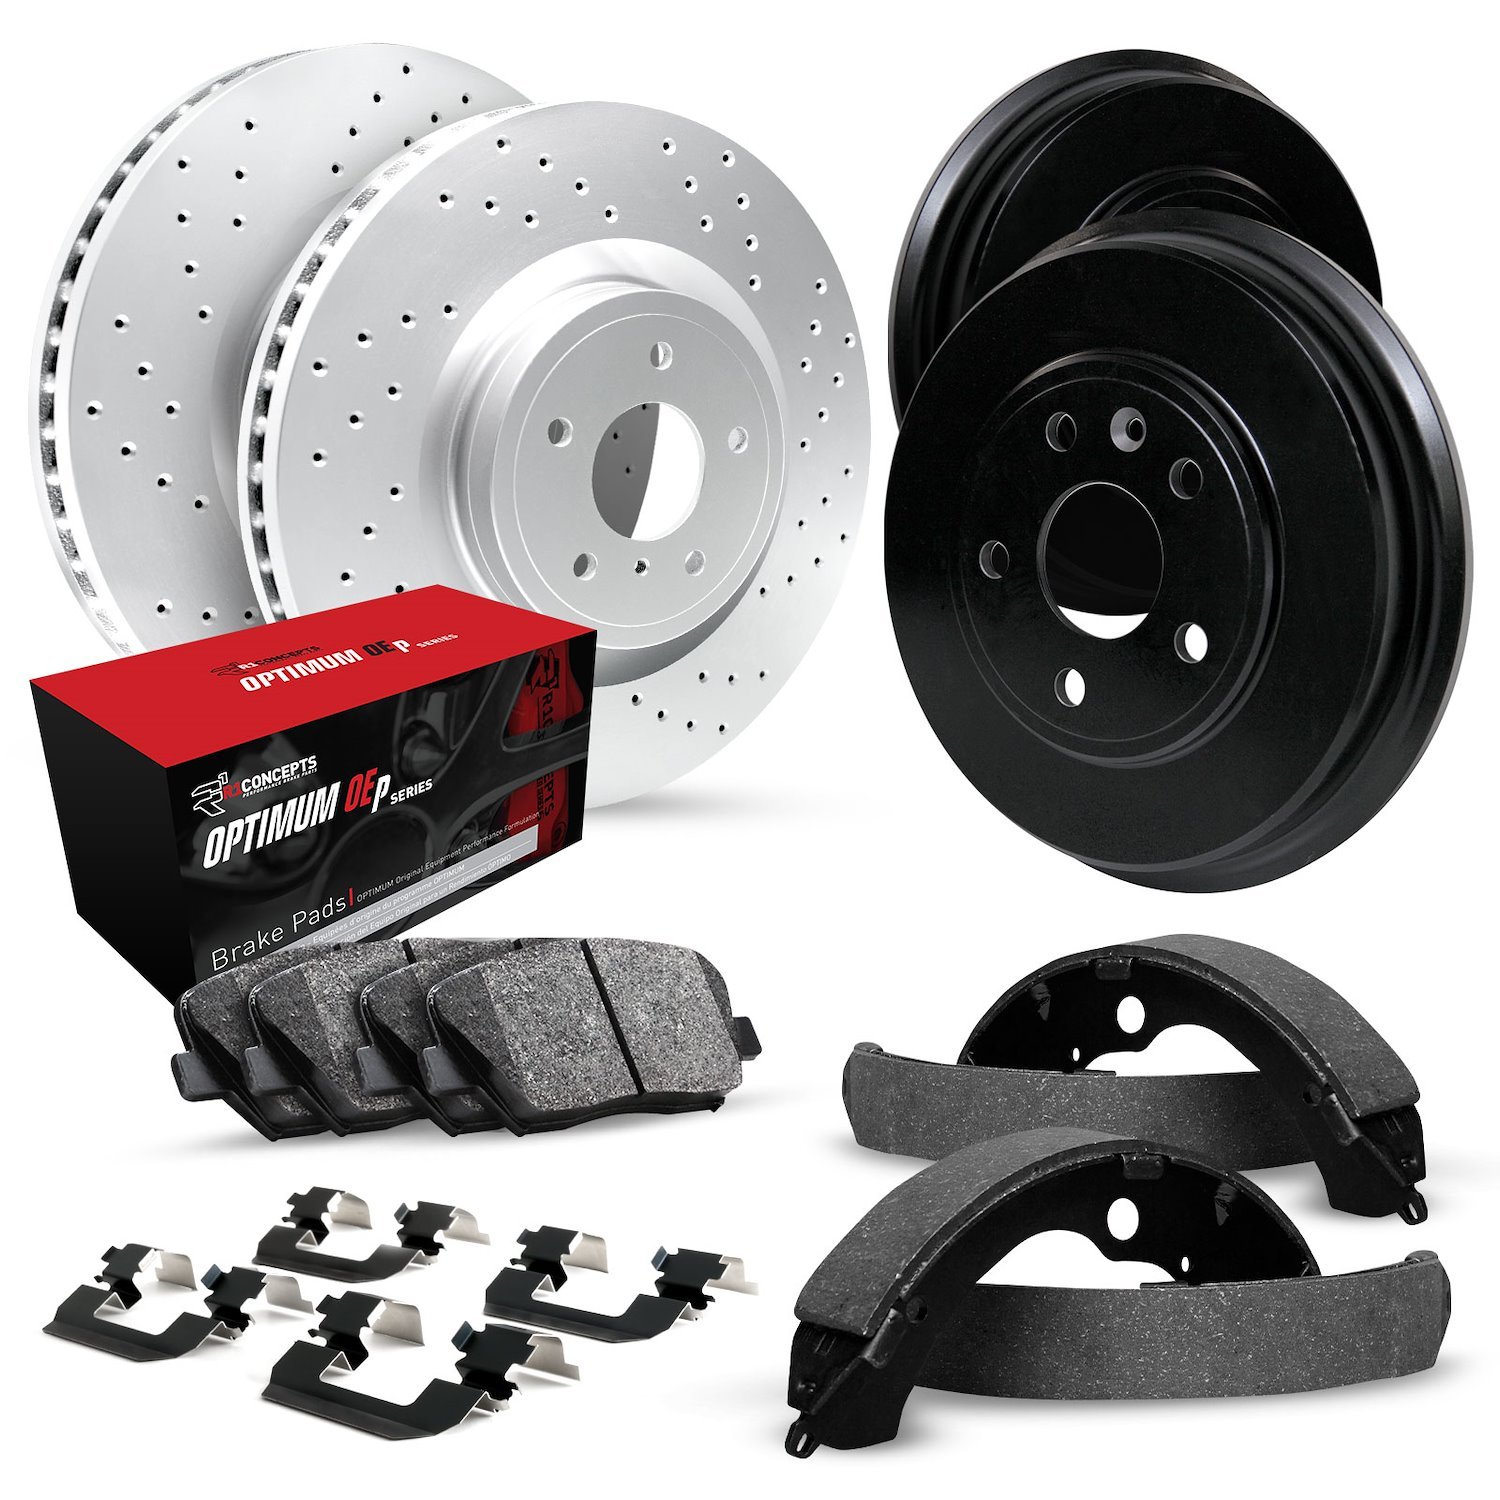 GEO-Carbon Drilled Brake Rotor & Drum Set w/Optimum OE Pads, Shoes, & Hardware, 1967-1970 GM, Position: Front & Rear